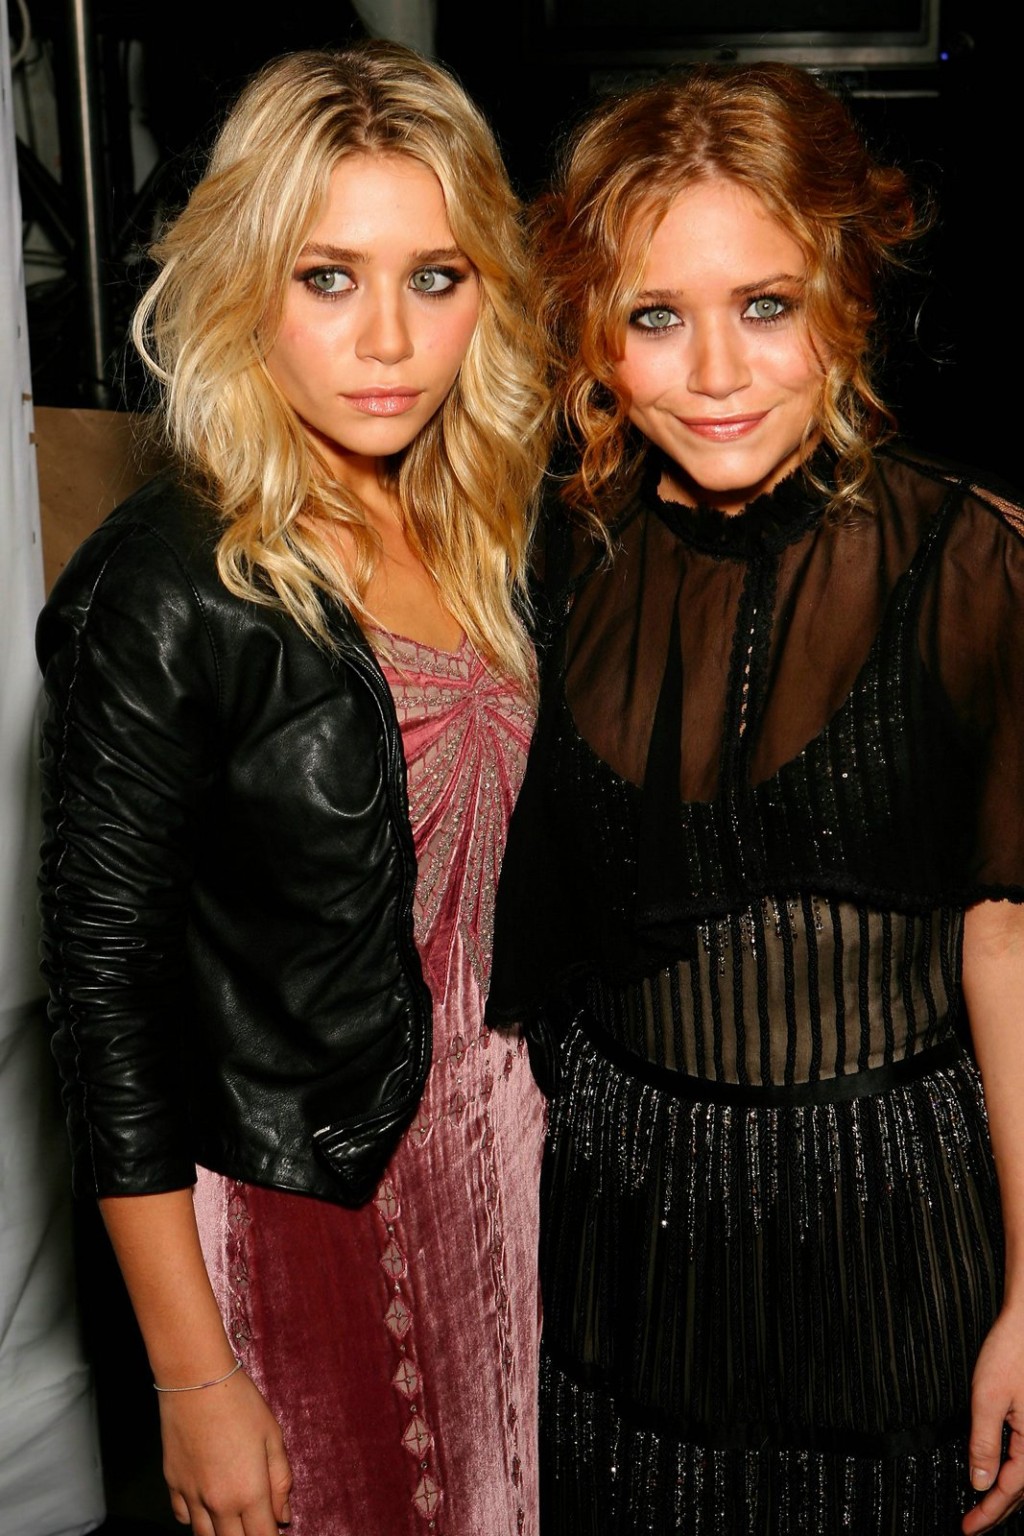 sexy petite twins Mary Kate and Ashley Olsen slight nudes and see thrus #75370445